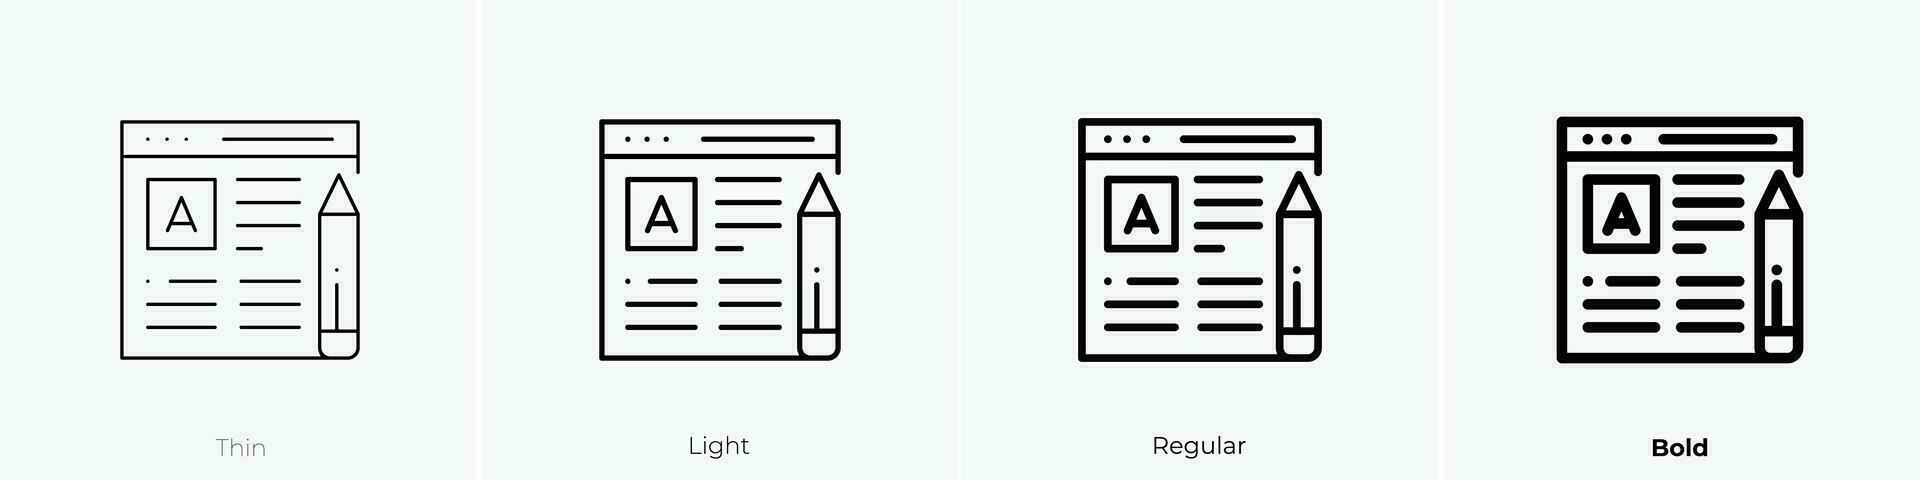 post icon. Thin, Light, Regular And Bold style design isolated on white background vector